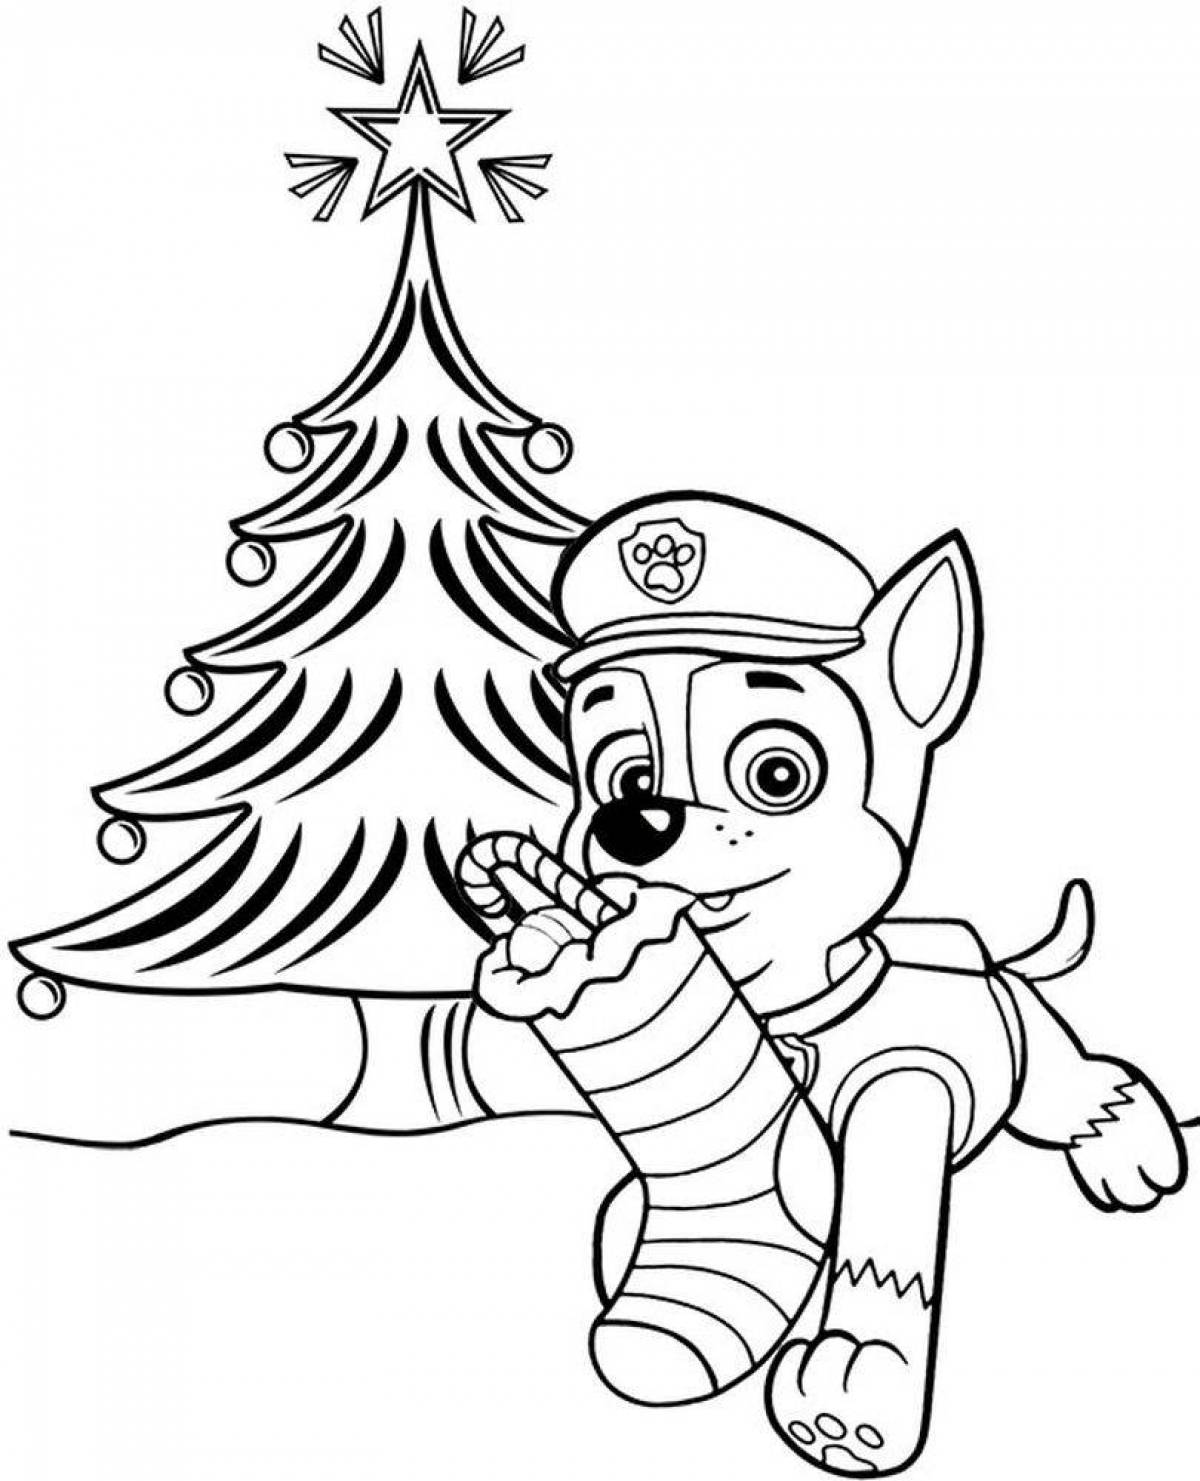 Cool paw patrol coloring book new